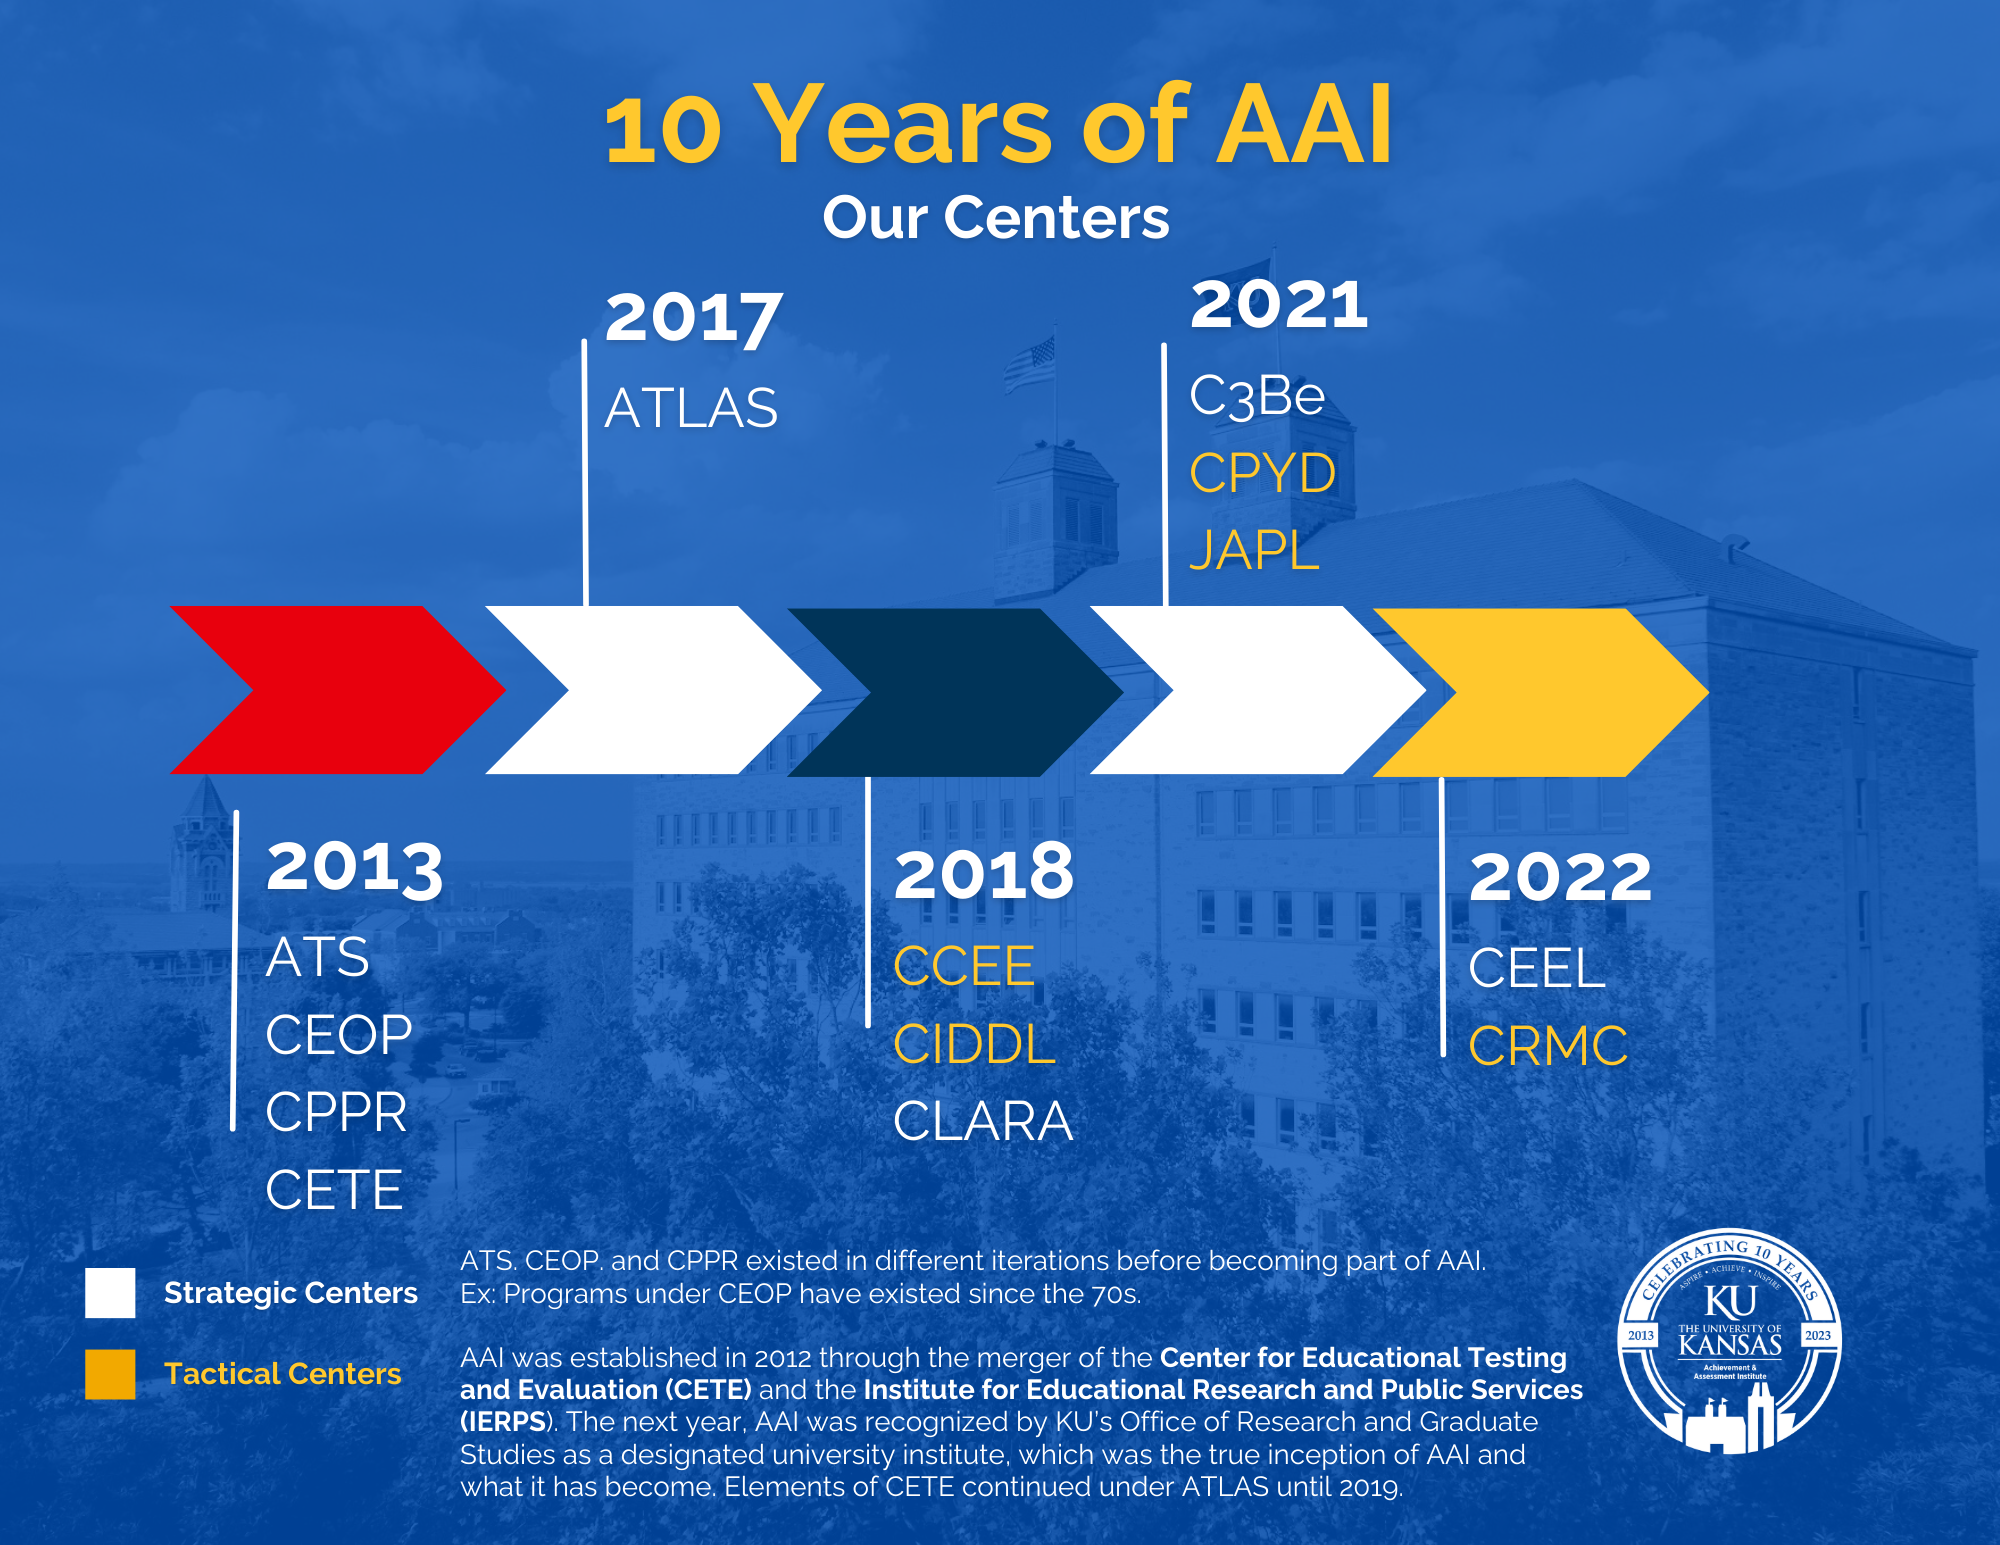 10 Years of AAI  Unless noted, centers are strategic.    2013 ATS  CEOP CPPR CETE  2017 ATLAS  2018 CCEE – Tactical Center CIDDL – Tactical Center CLARA   2021 C3Be CPYD – Tactical Center JAPL– Tactical Center  2022 CEEL CMRC – Tactical Center    ATS. CEOP. and CPPR existed in different iterations before becoming part of AAI. Ex: Programs under CEOP have existed since the 70s. AAI was established in 2012 through the merger of the Center for Educational Testing and Evaluation (CETE) and the Institute for Educational Research and Public Services (IERPS). The next year, AAI was recognized by KU’s Office of Research and Graduate Studies as a designated university institute, which was the true inception of AAI and what it has become. Elements of CETE continued under ATLAS until 2019.